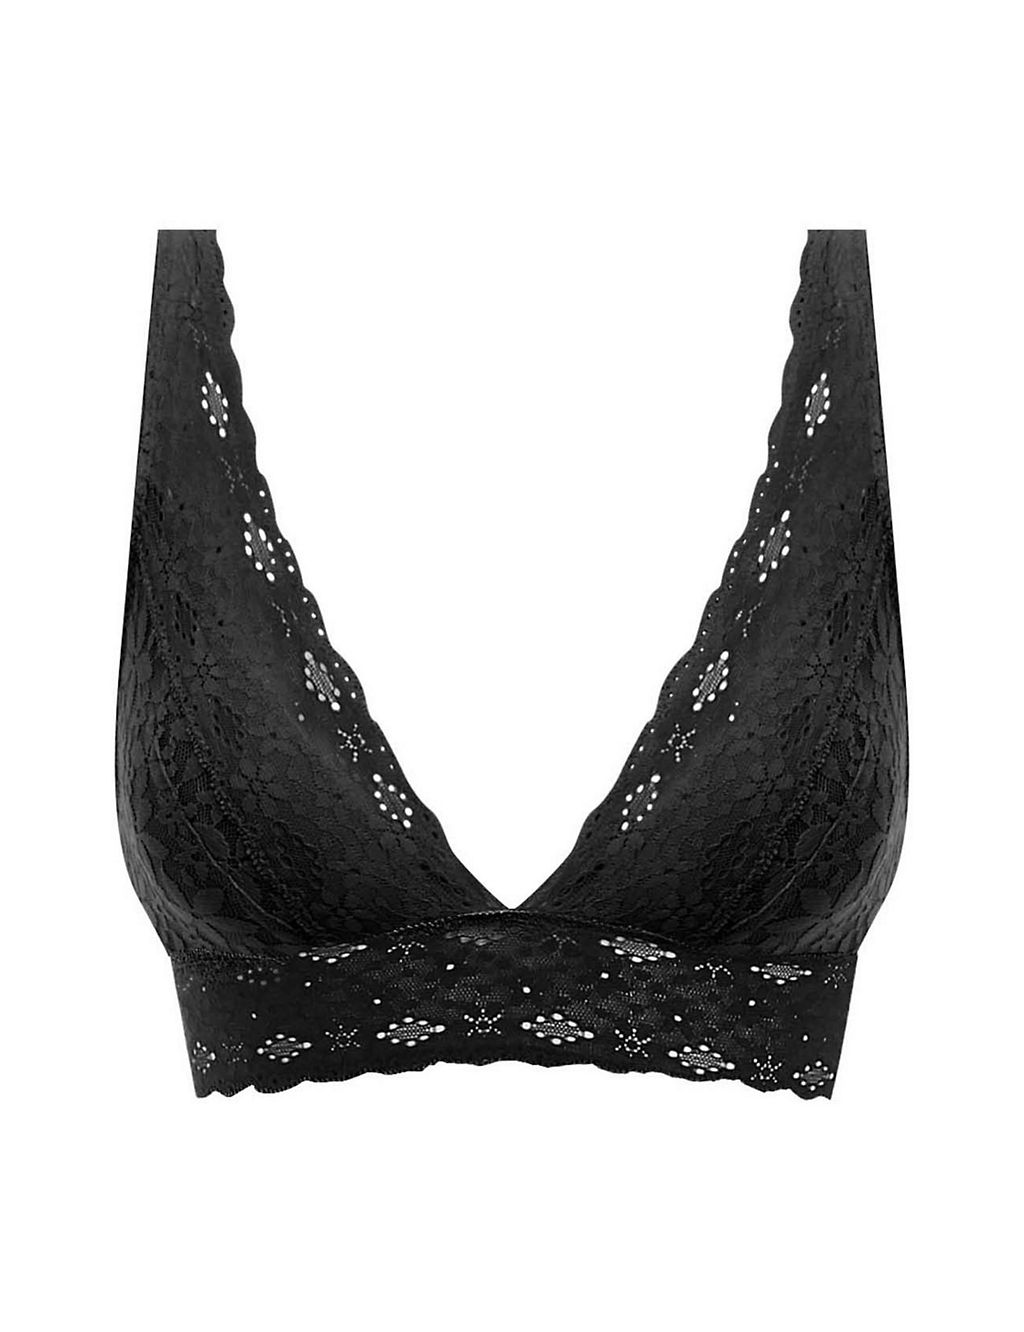 Halo Floral Lace Non Wired Plunge Bra | Wacoal | M&S